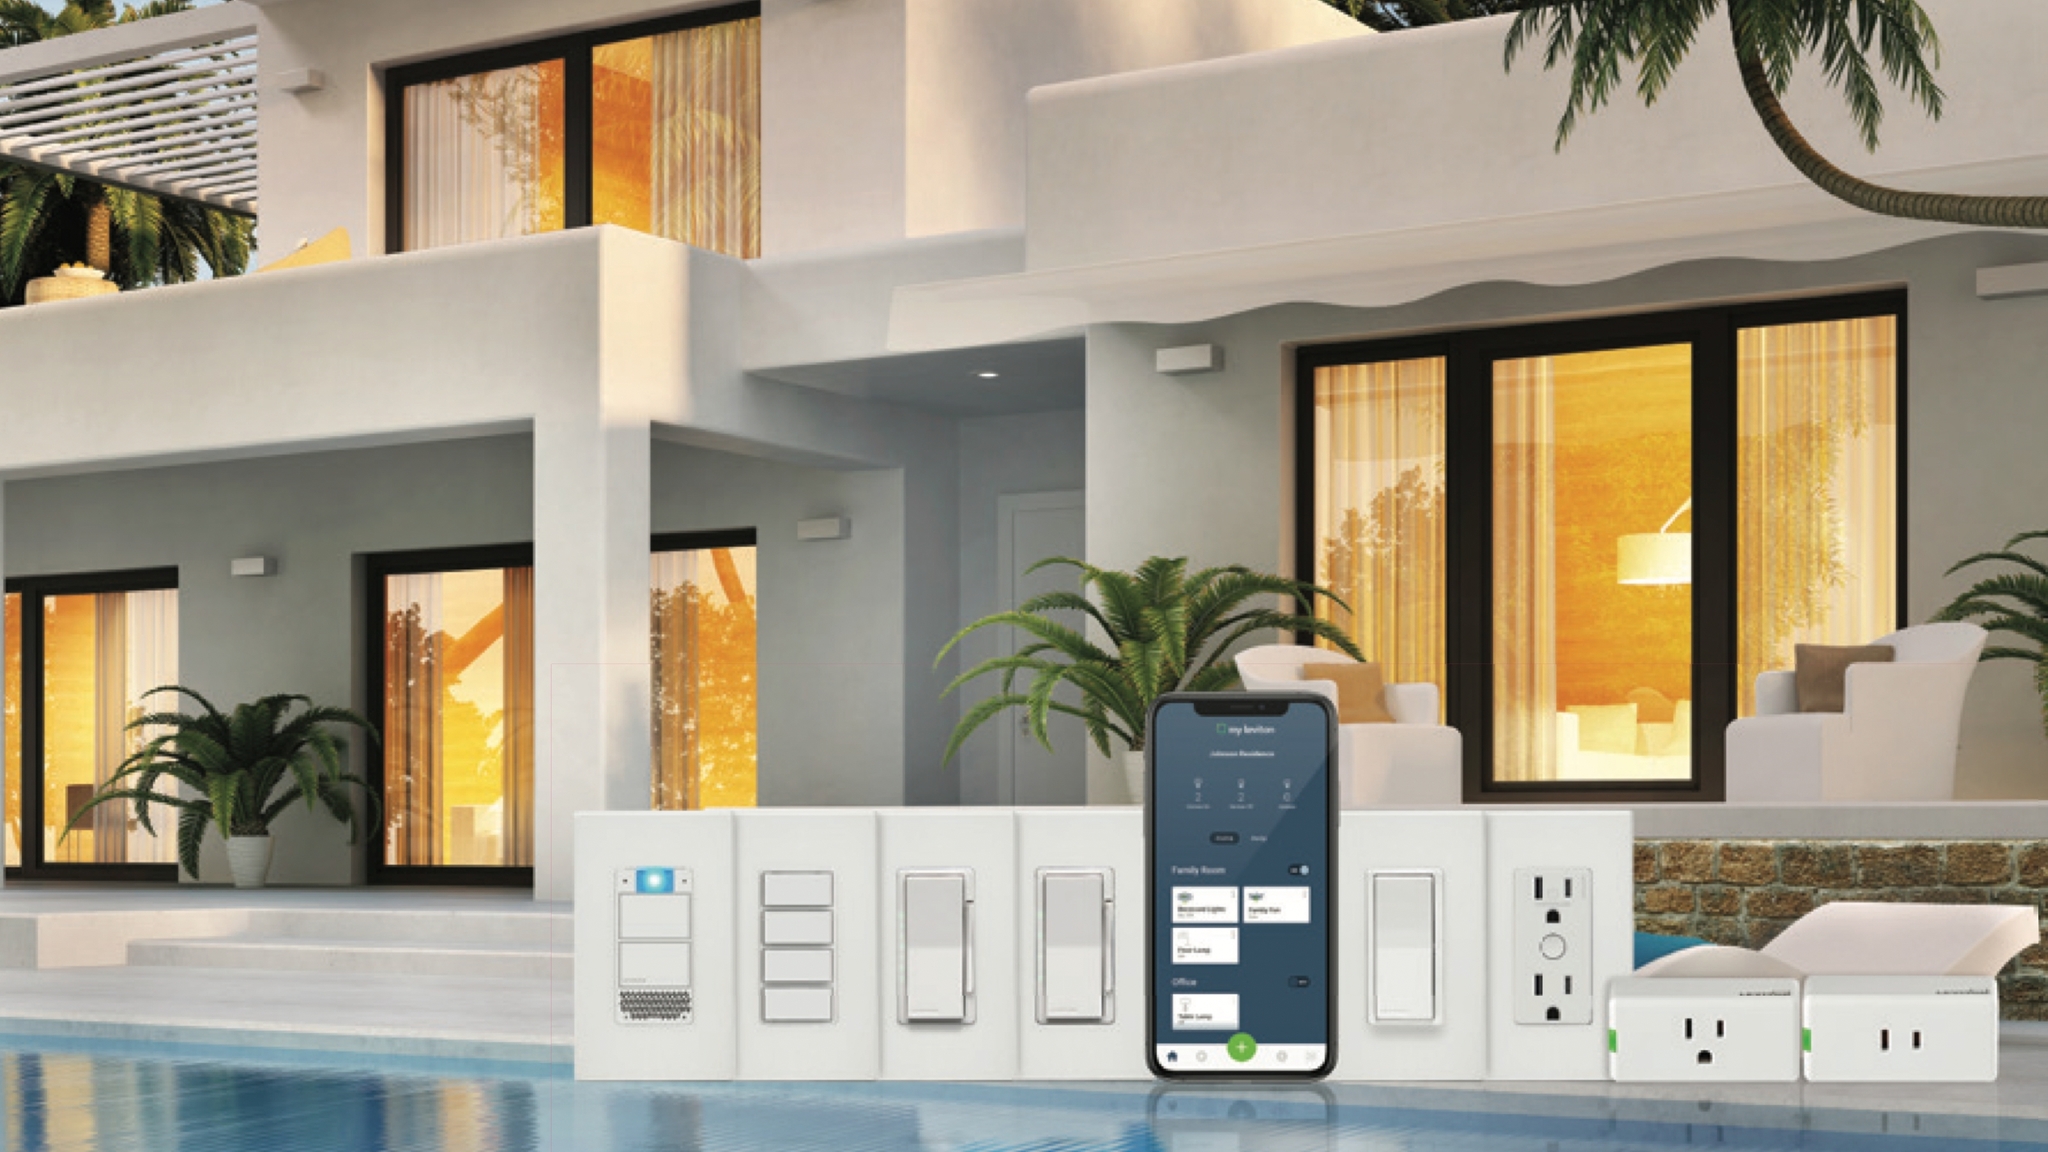 These Leviton smart light switches and dimmers just got a major free upgrade